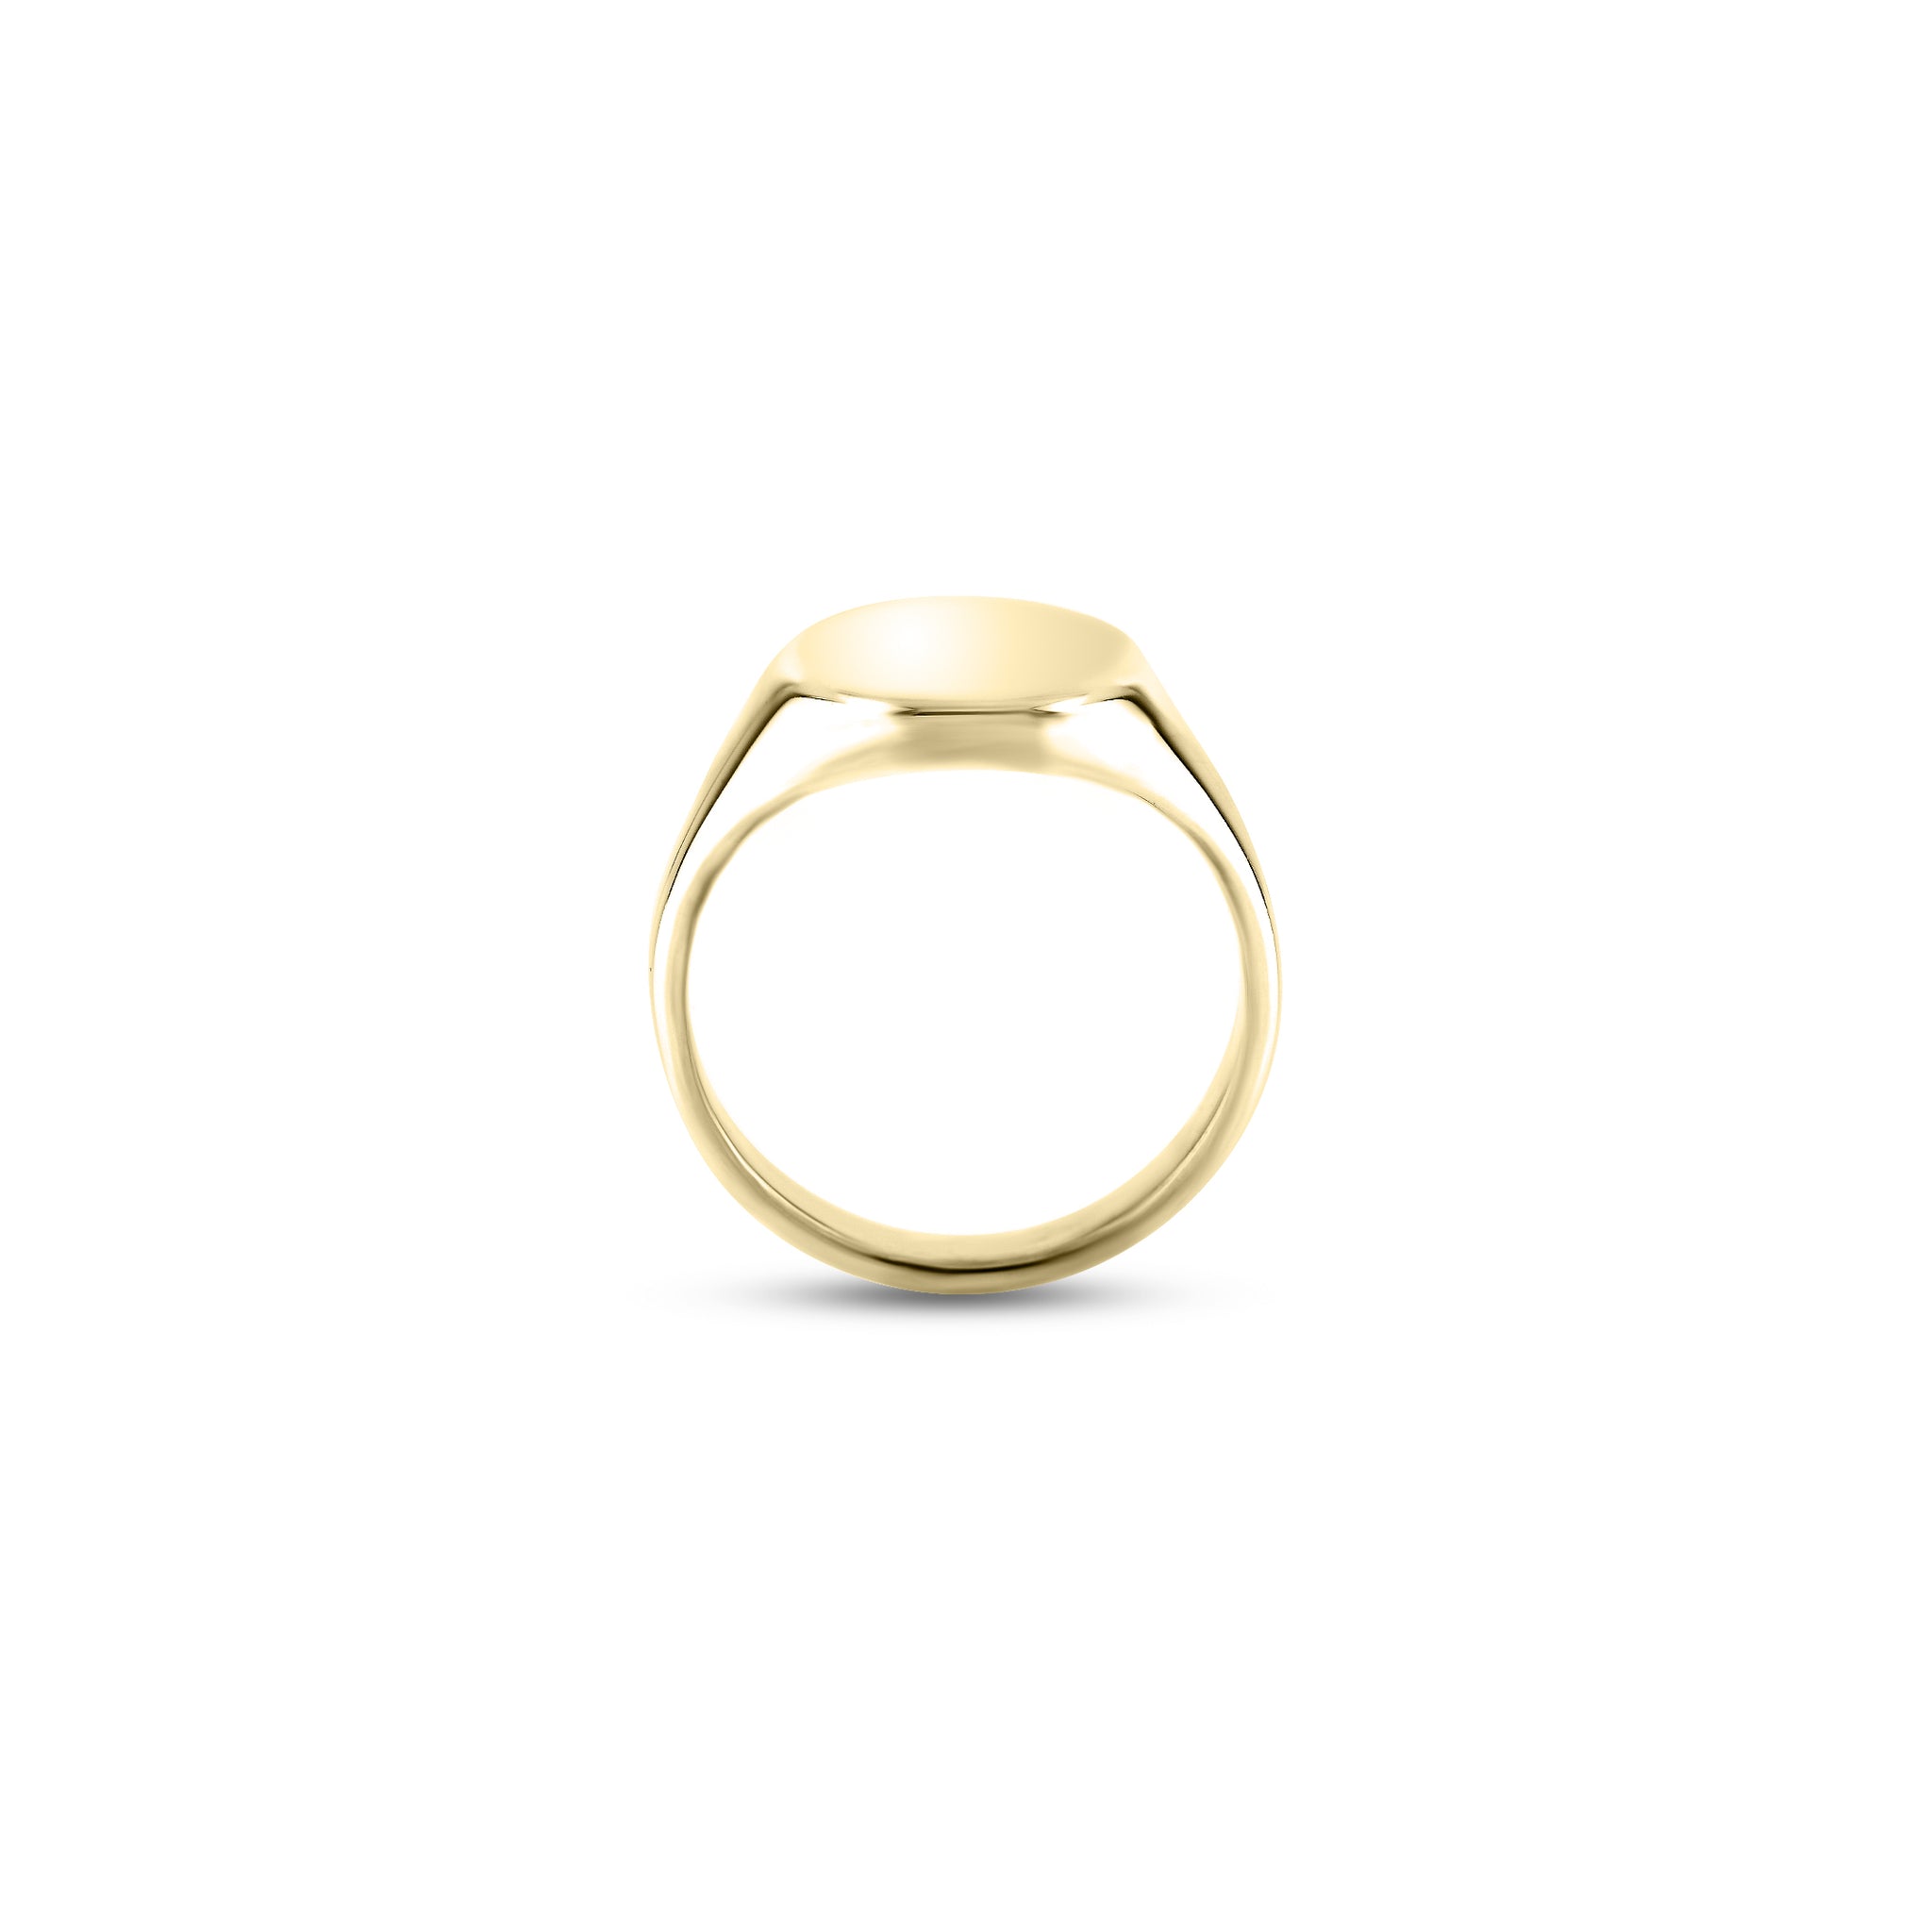 9ct Yellow Gold 16 x 13mm Oval Signet Ring